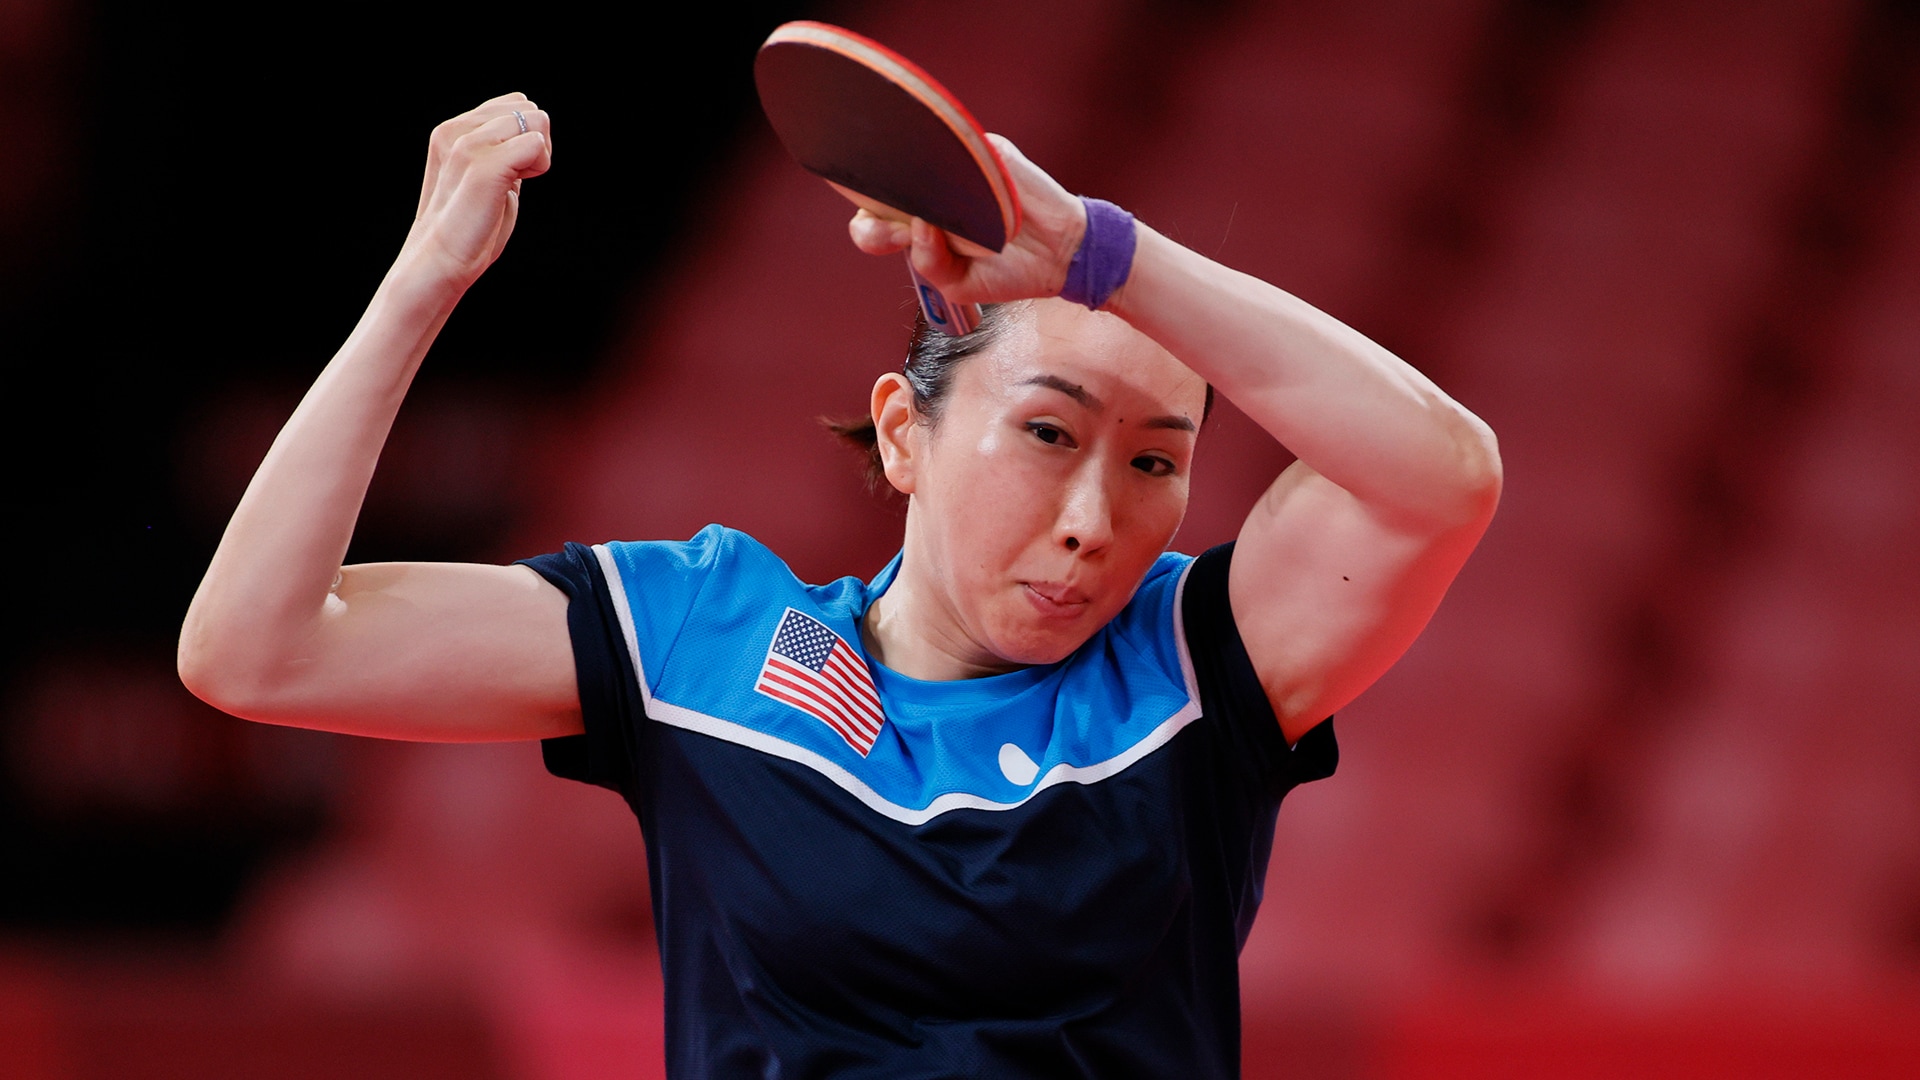 Table Tennis Day 4 Results: USA's Liu Into the Round of 16